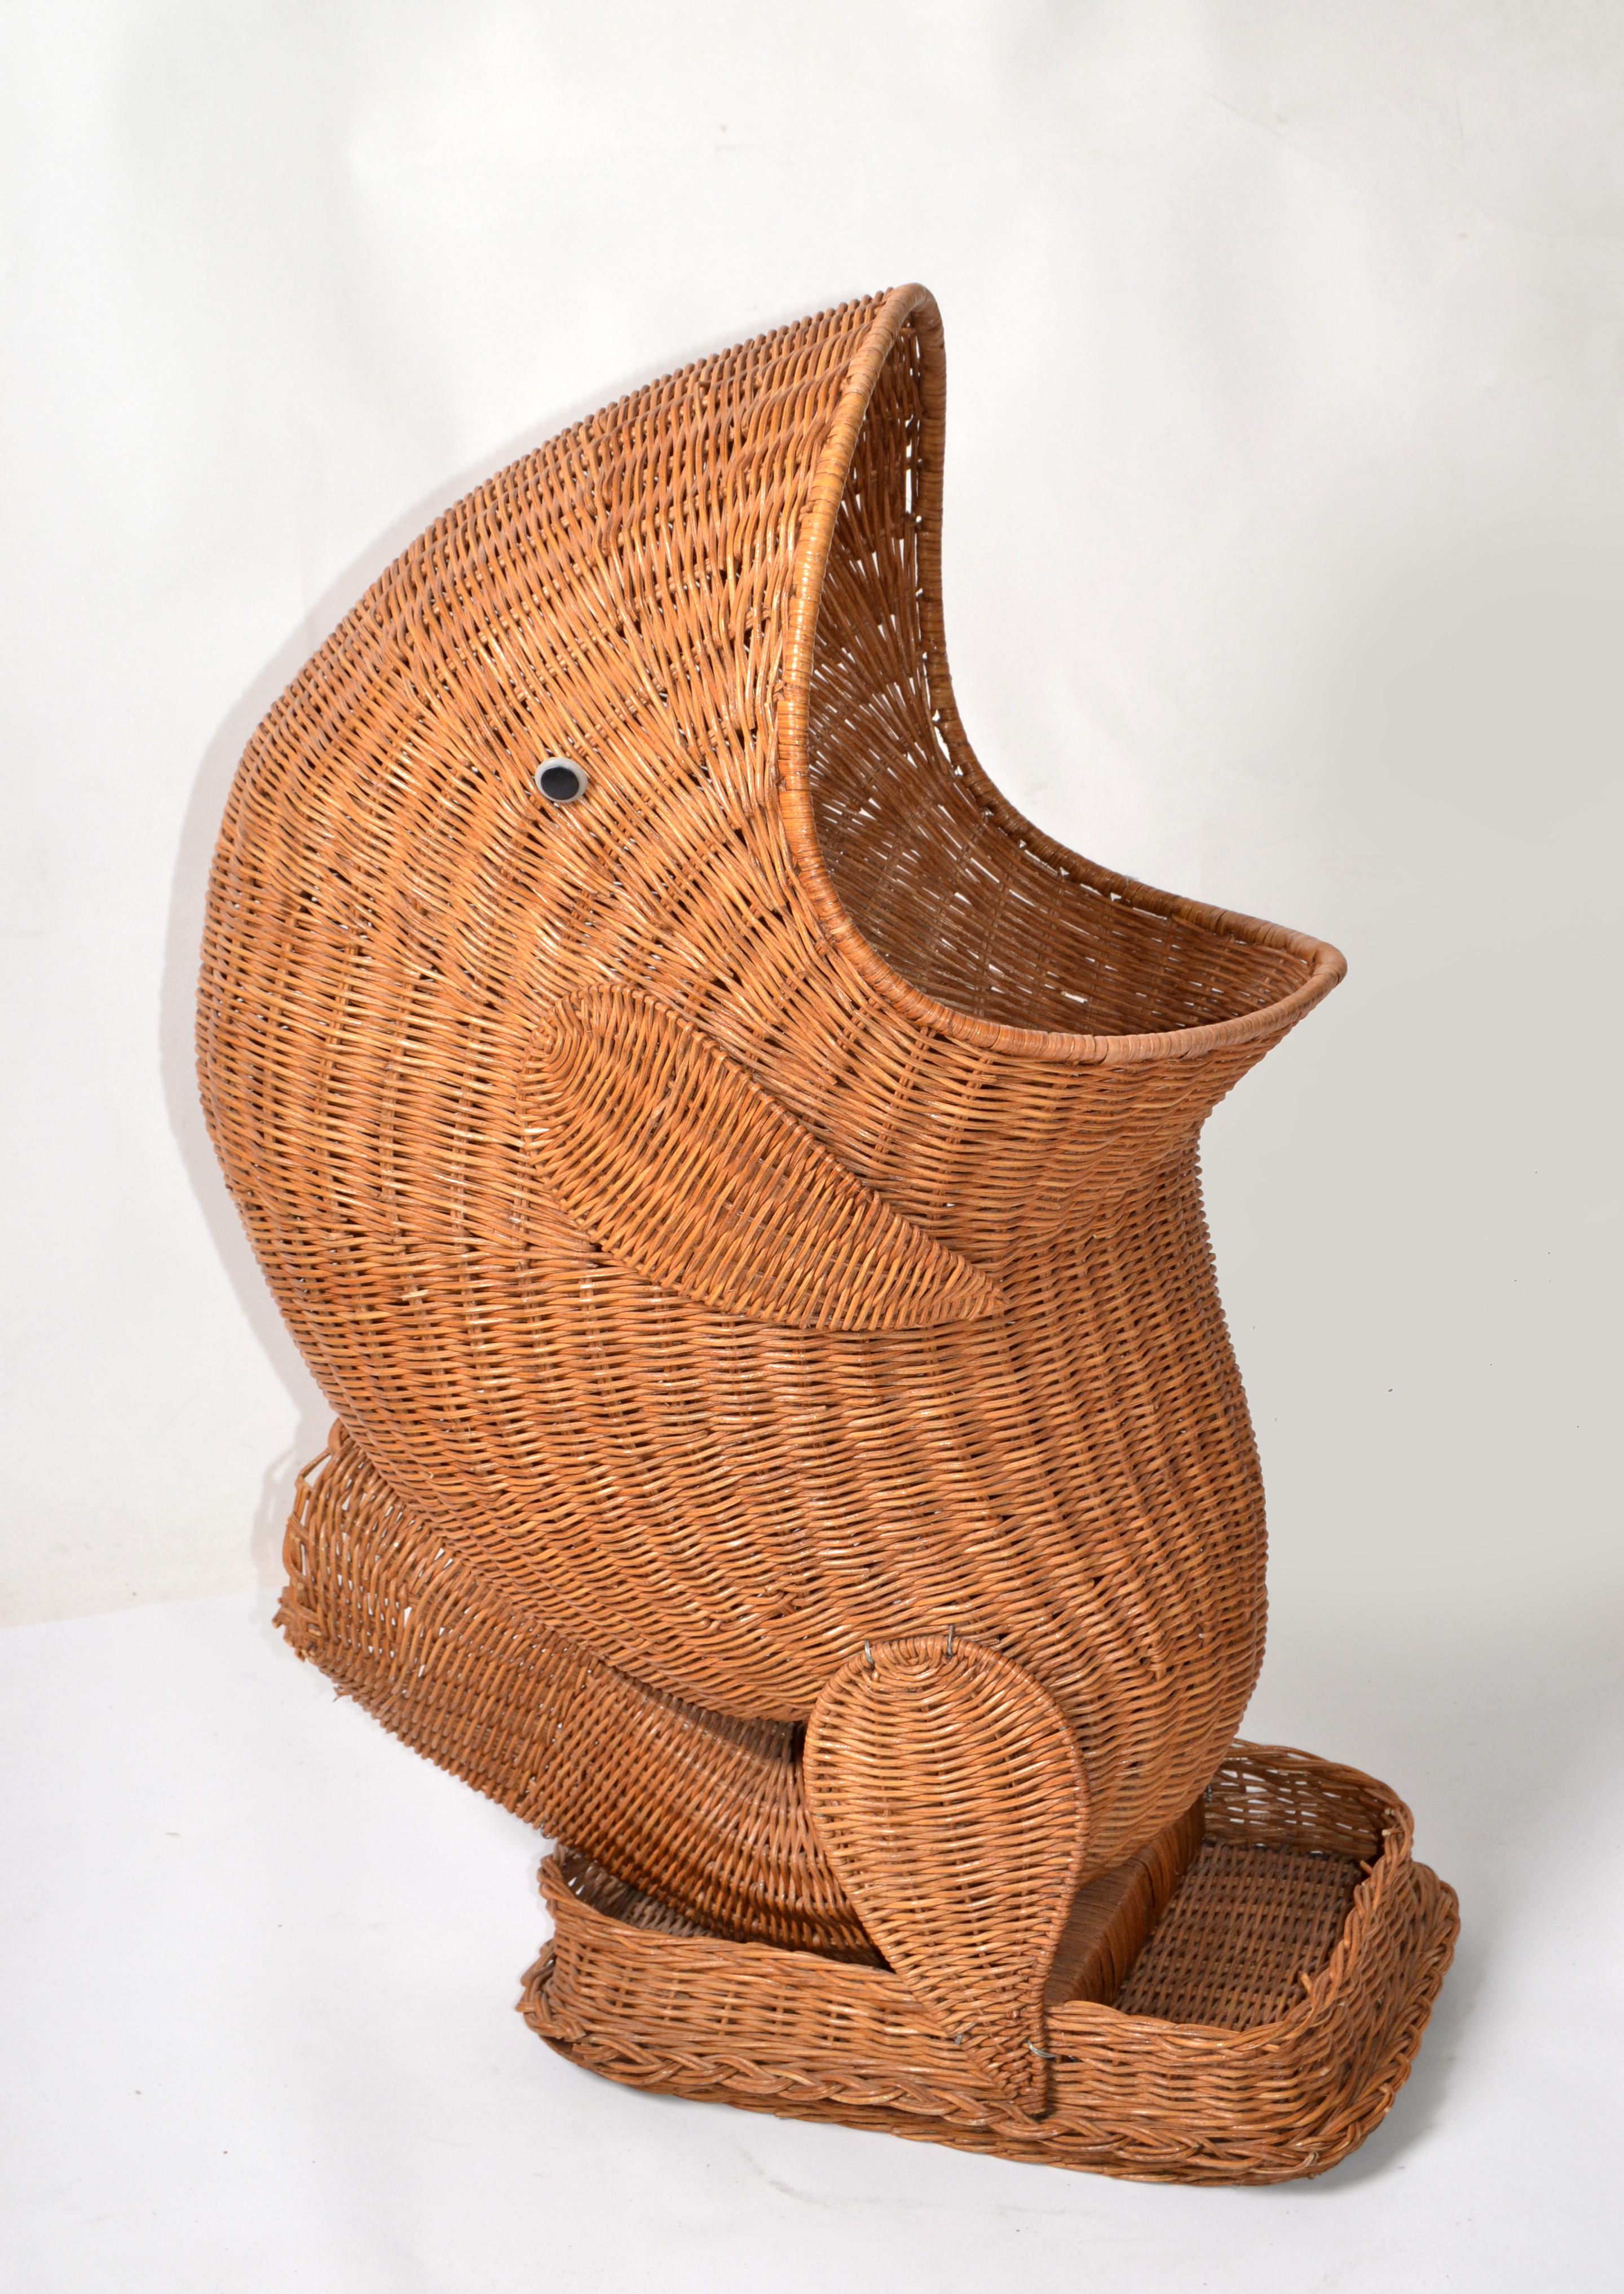 Mario Lopez Torres Style Mid-Century Modern hand-woven Dolphin Basket, Toy Storage Vessel, Animal Sculpture.
Bohemian Style made in America in the late 20th Century.
All original condition with some white marks to the Rattan and some breaks at the